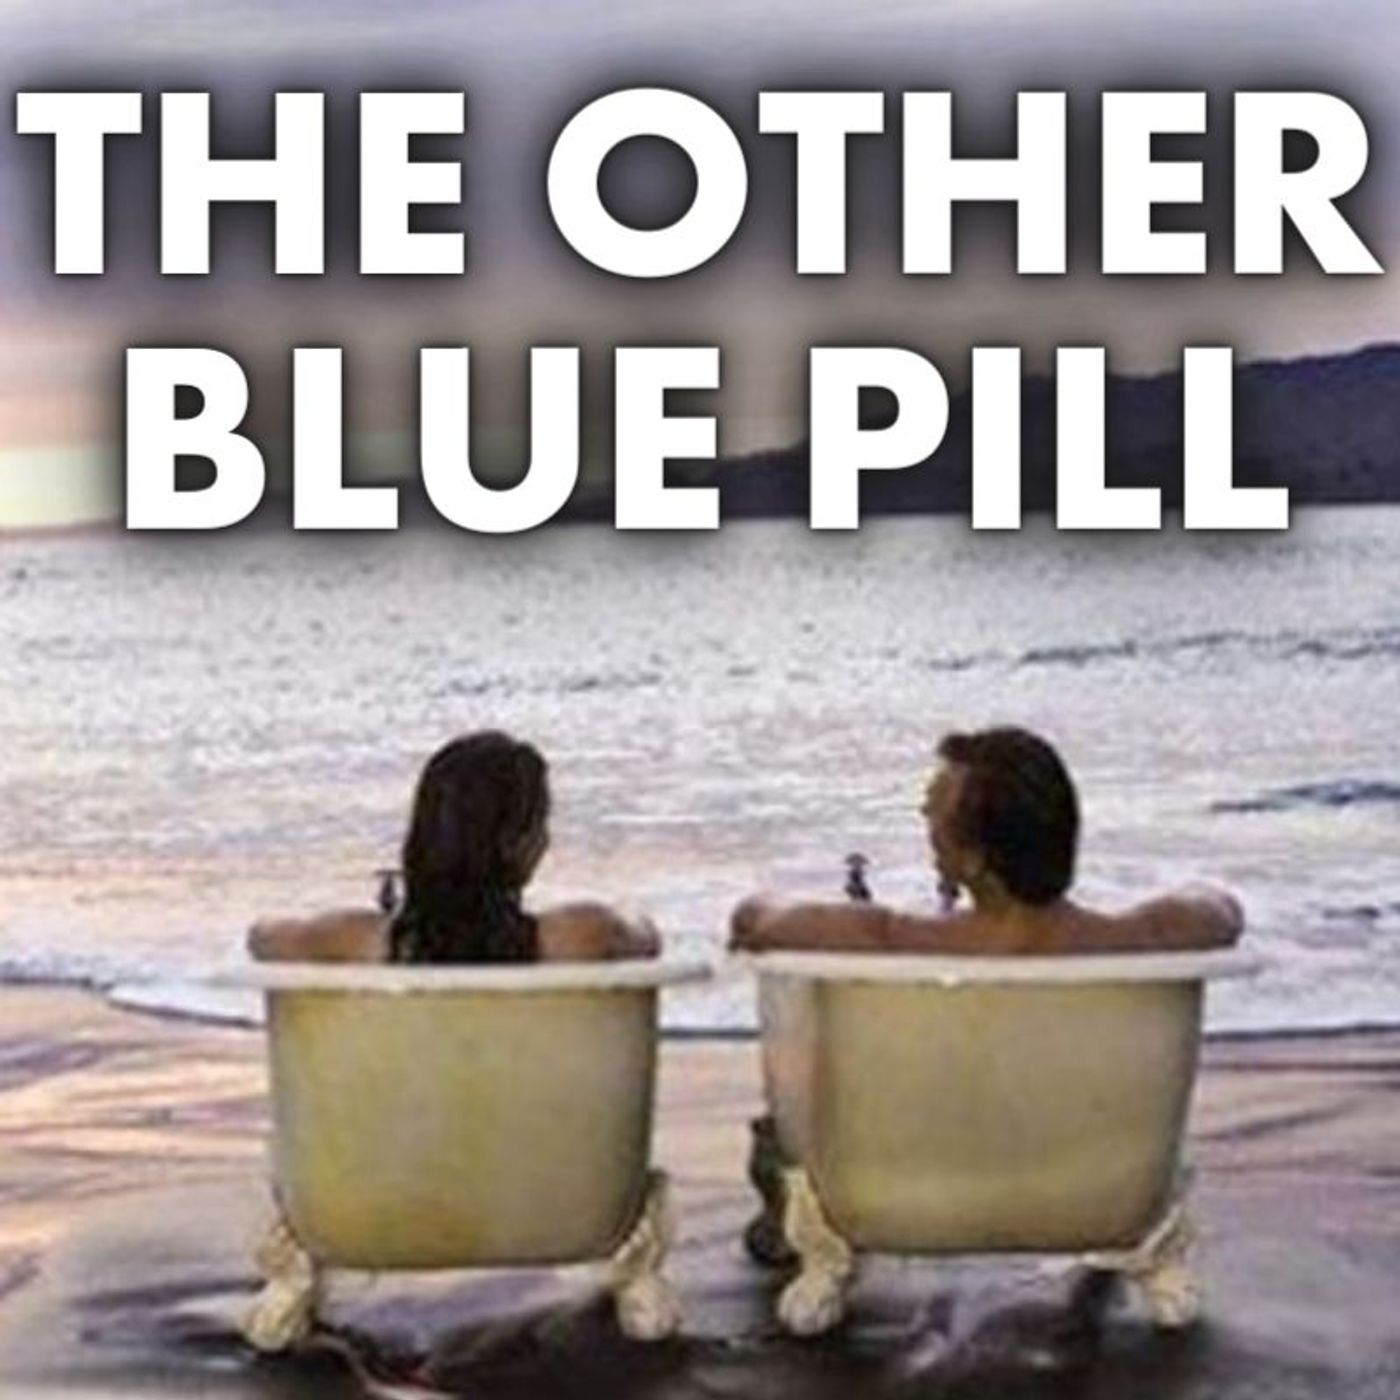 The ”Other” Blue Pill 🔵